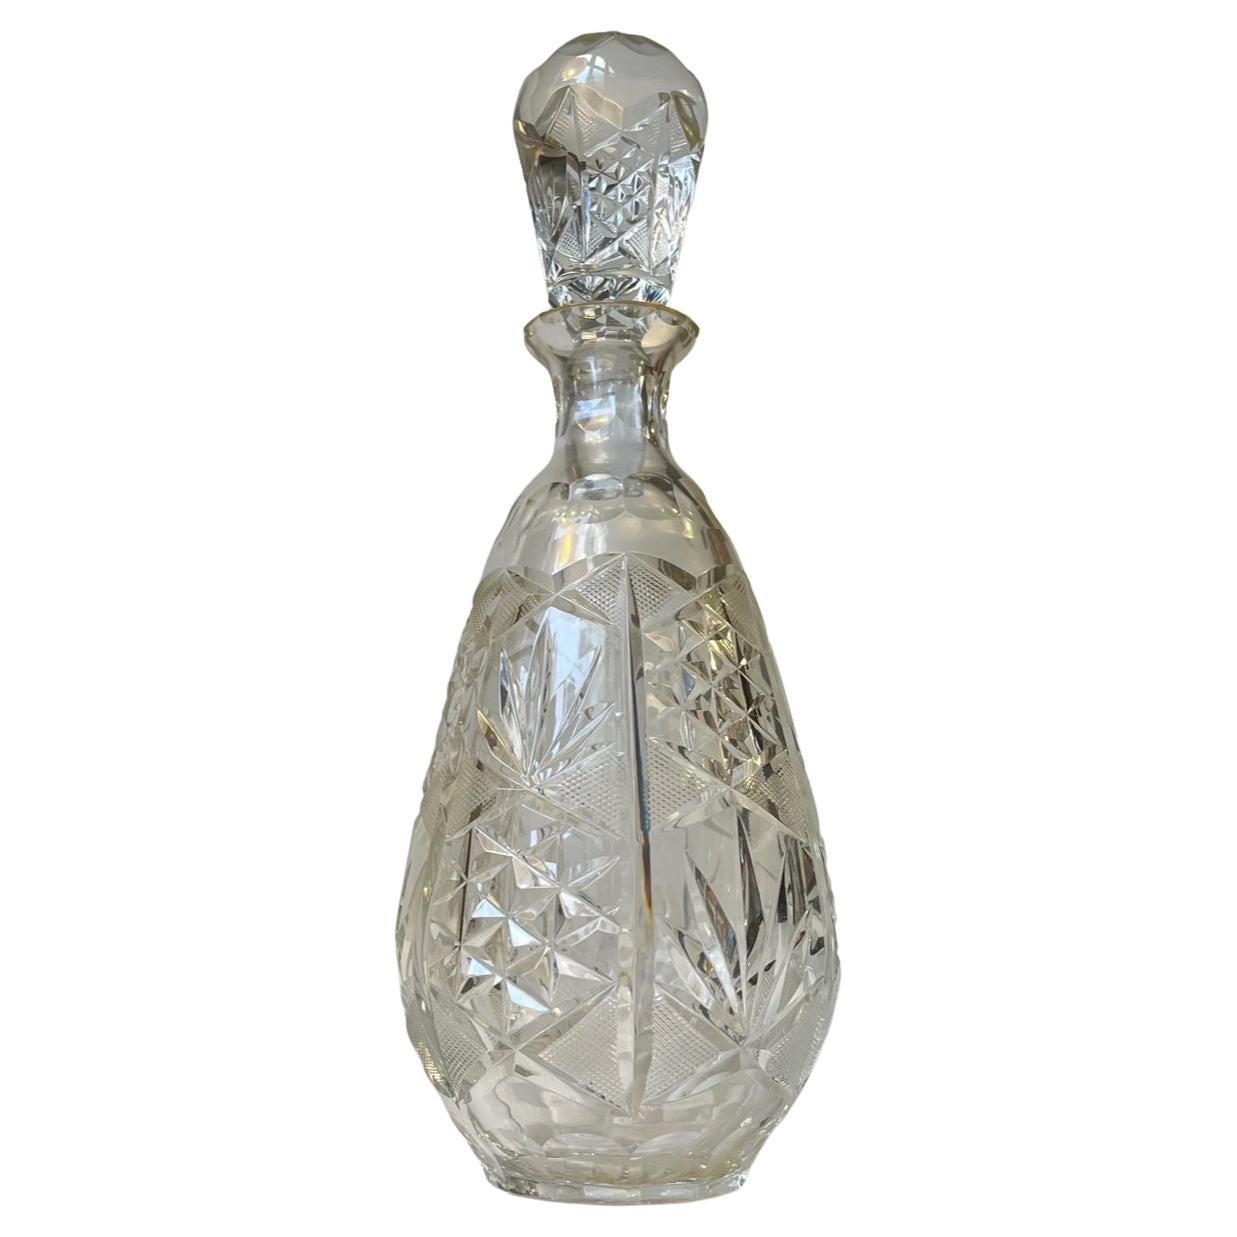 French Midcentury Cut Crystal Decanter from Cristal De Lorraine, 1950s